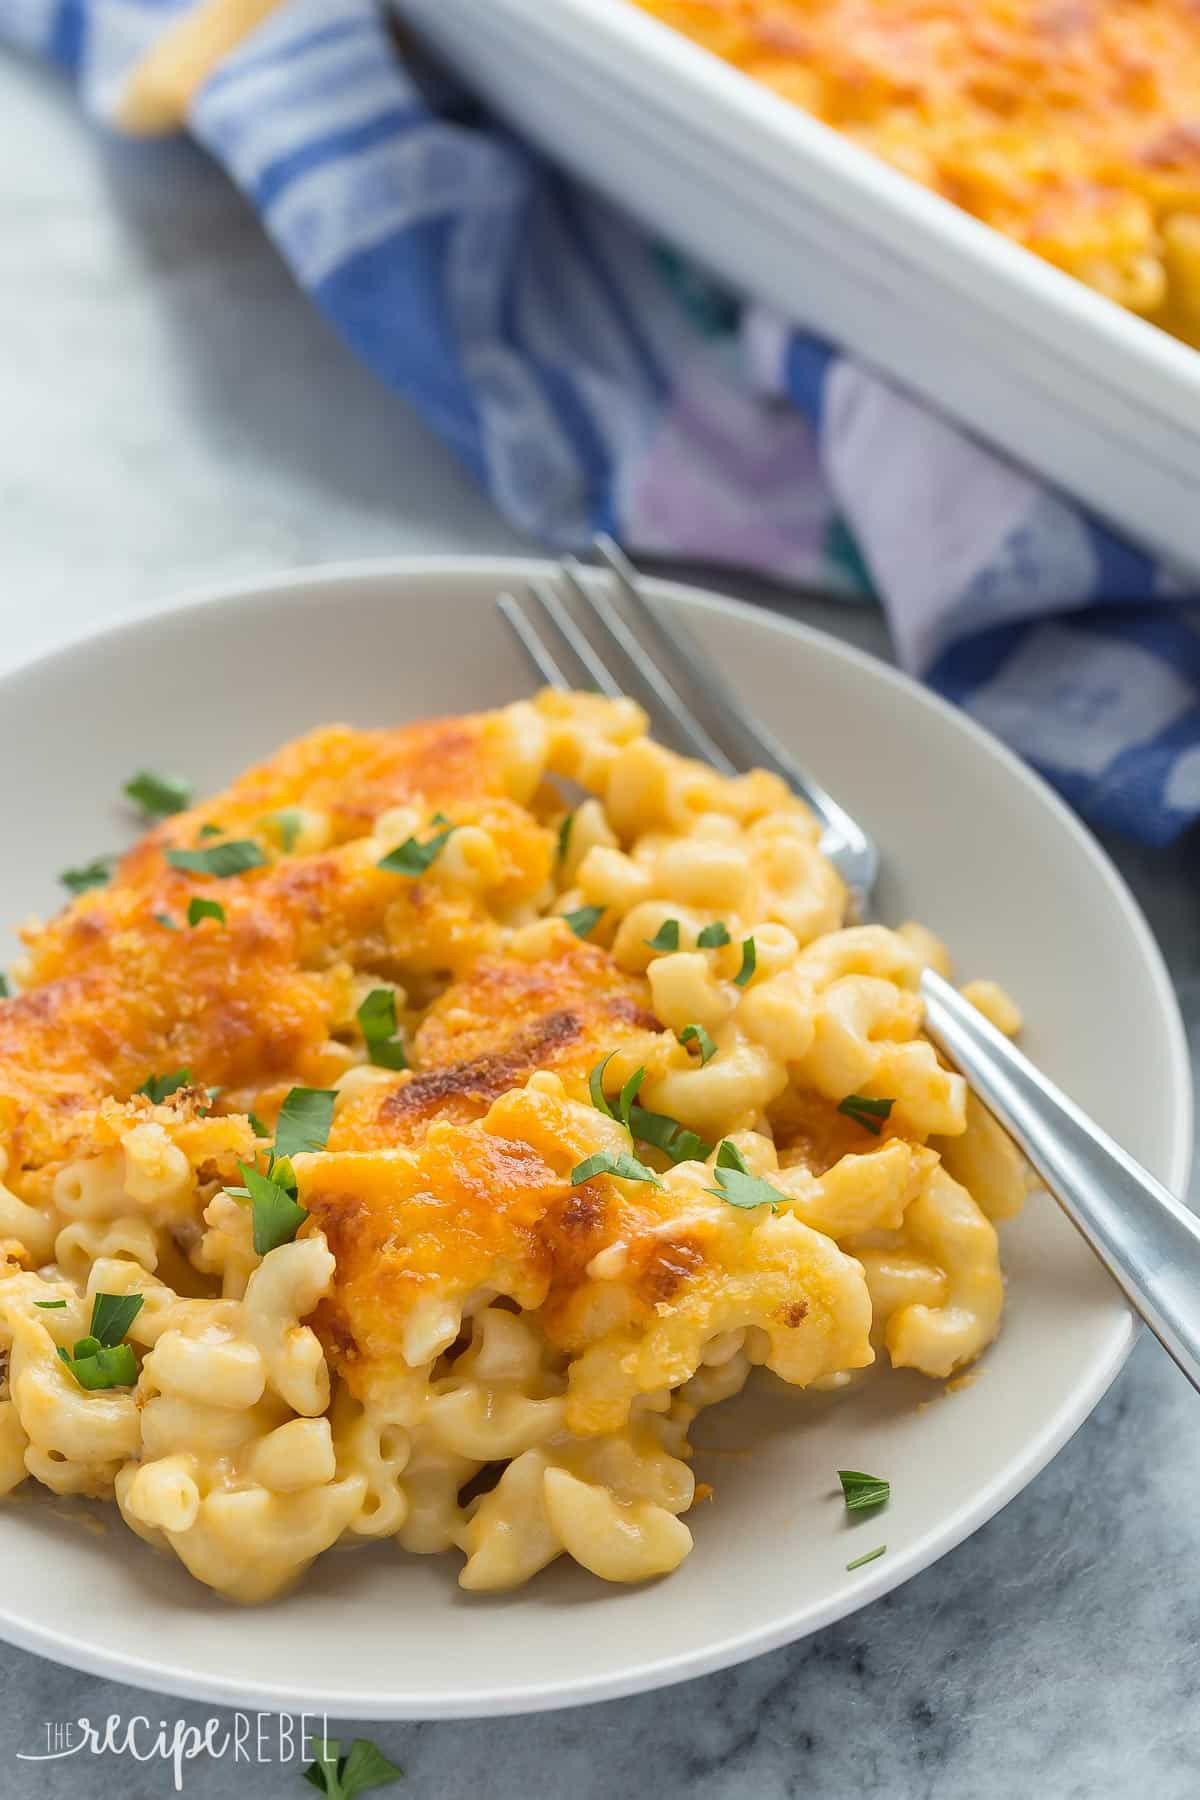 Low Fat Mac And Cheese Recipes
 Healthier Baked Mac and Cheese